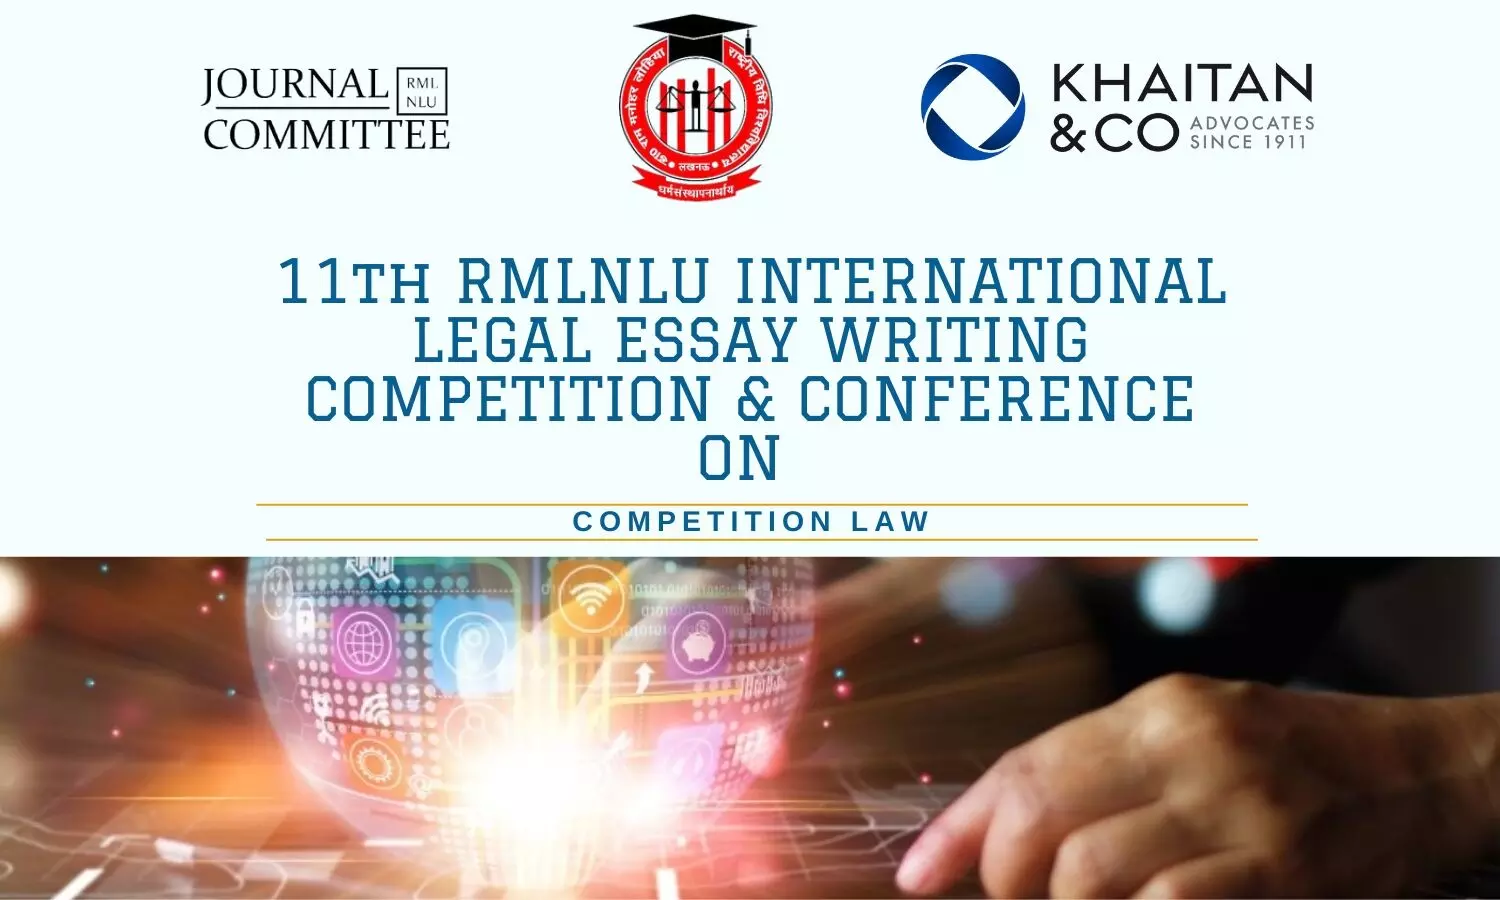 11th RMLNLU-Khaitan & Co International Legal Essay Writing Competition and Conference on Competition Law.